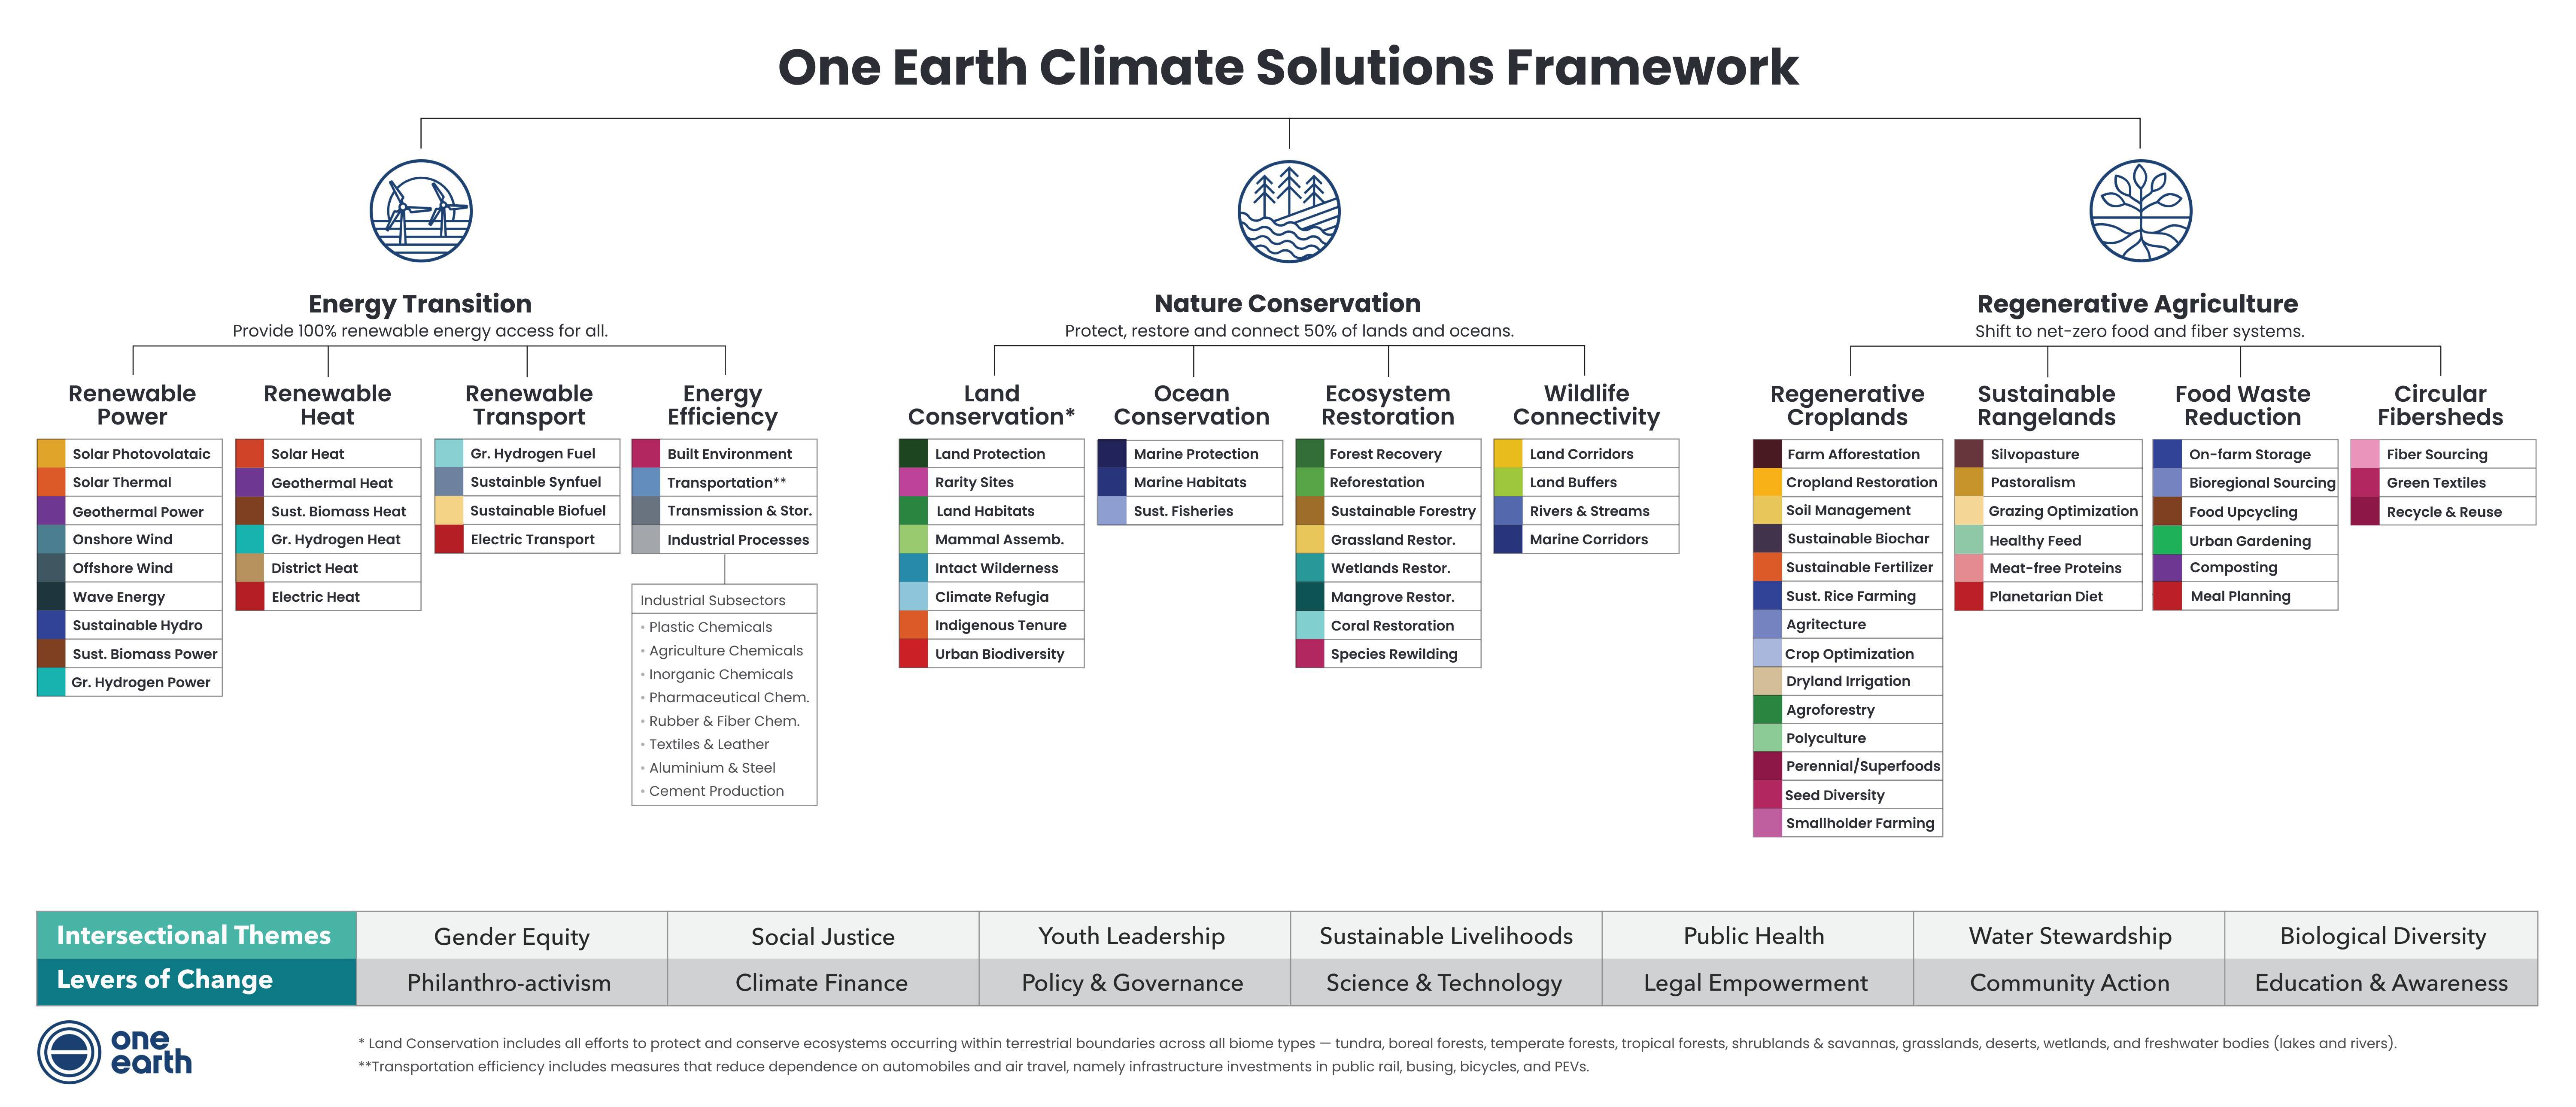 One Earth Climate Solutions Framework